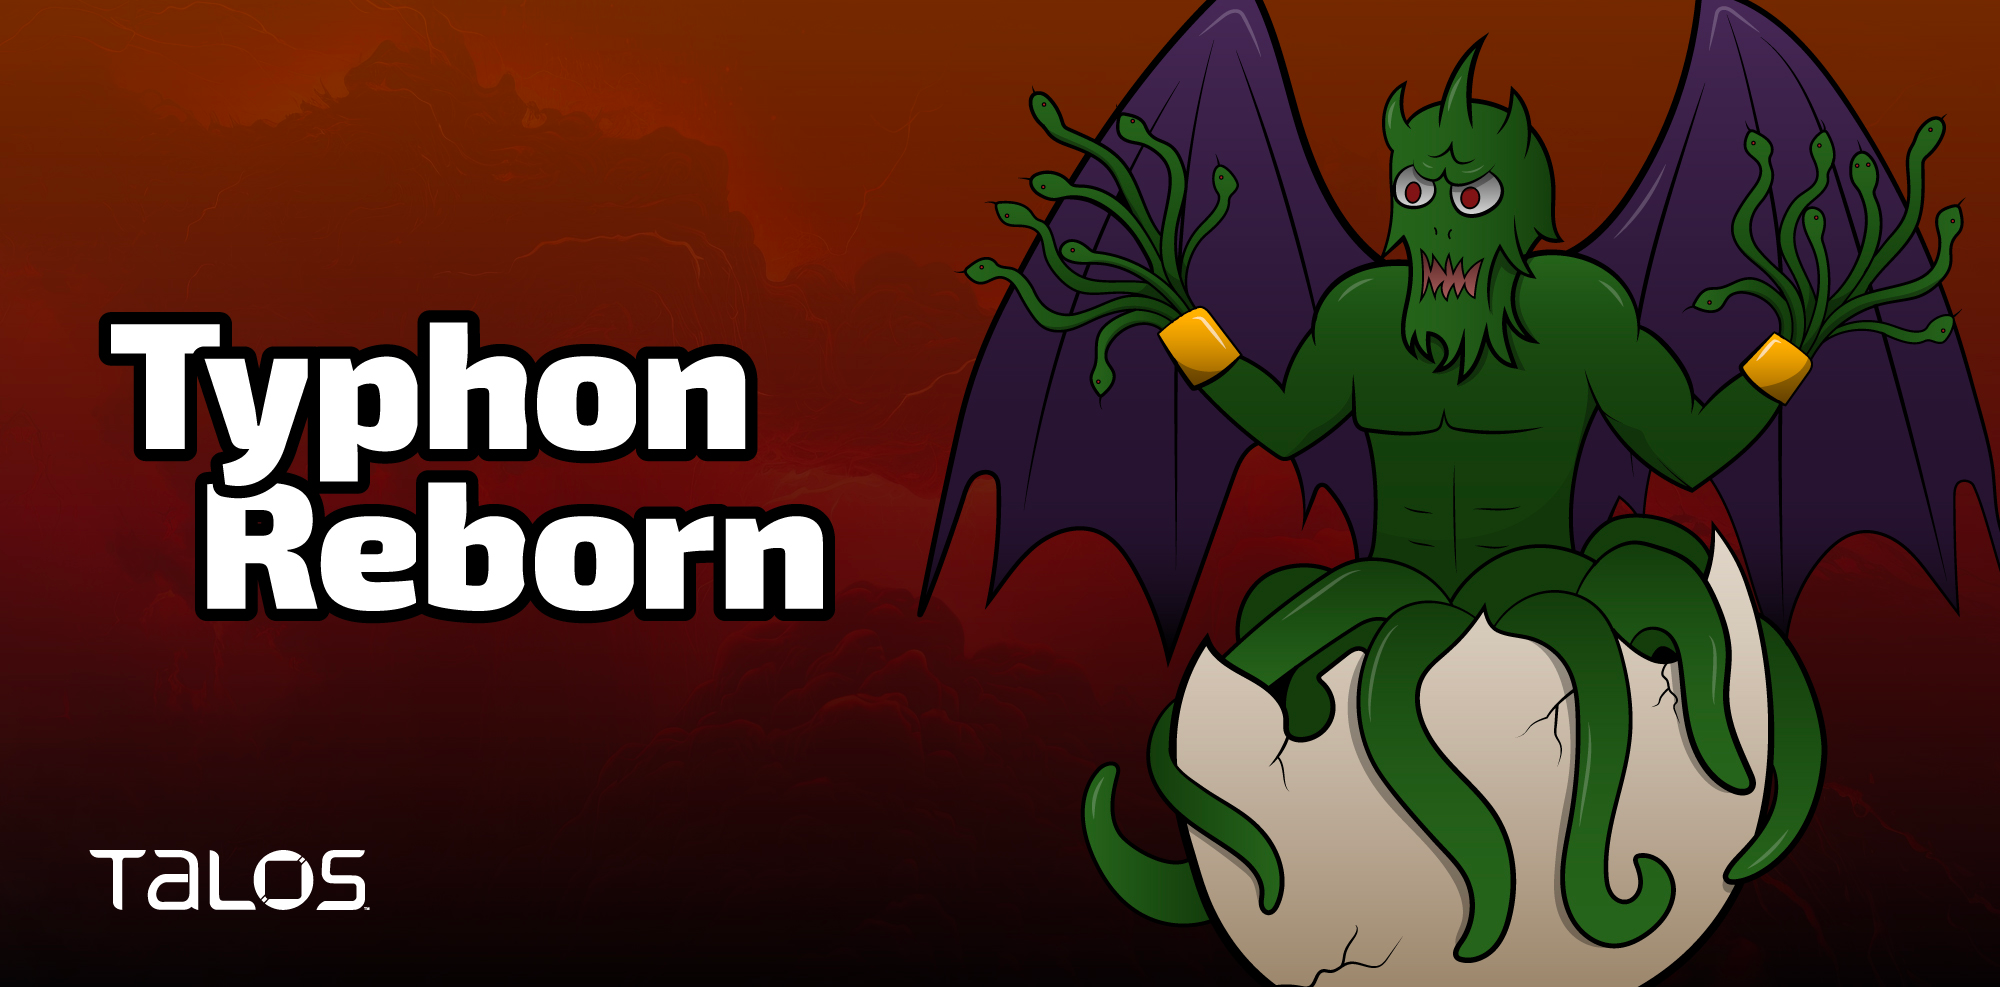 Typhon Reborn V2: Updated stealer features enhanced anti-analysis and evasion capabilities